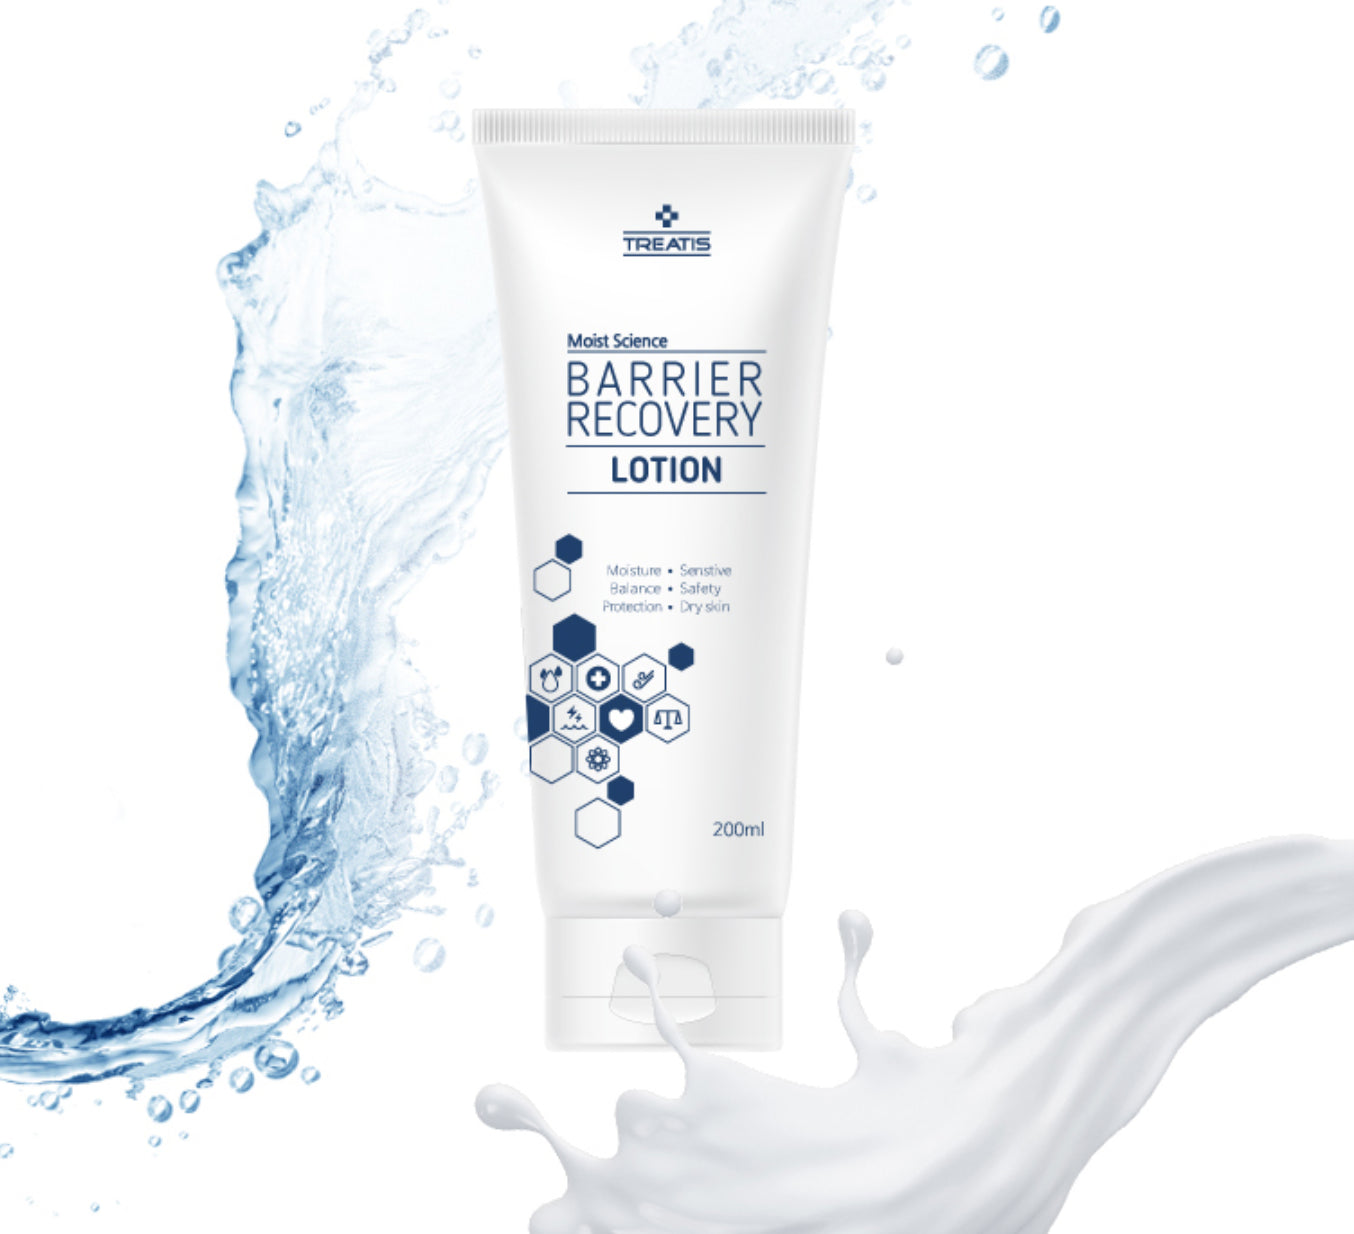 TREATIS Moist science BARRIER RECOVERY LOTION